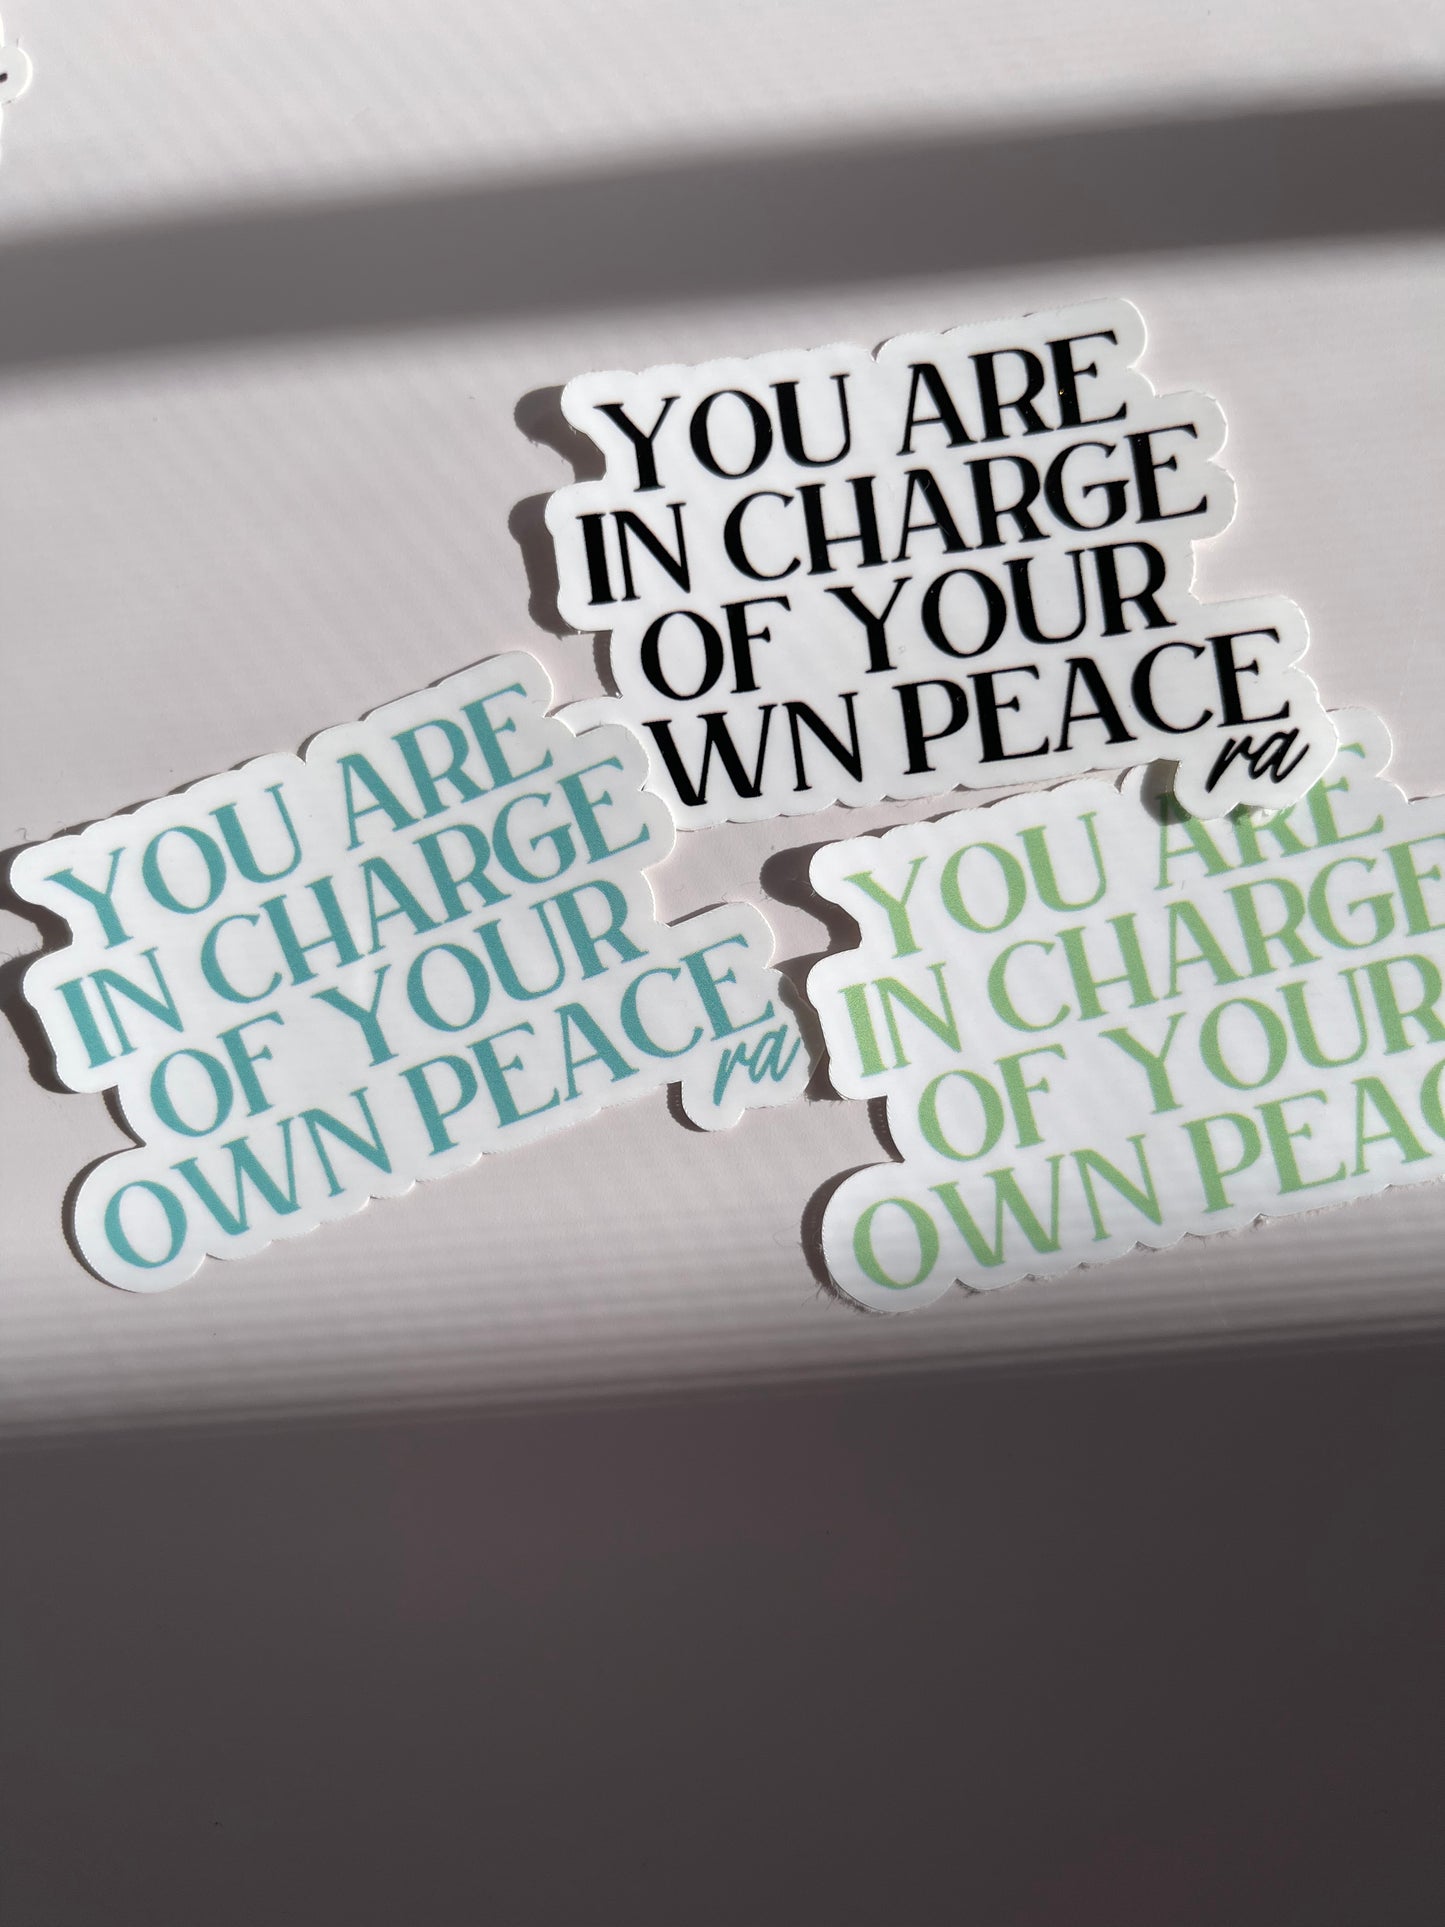 Your peace sticker